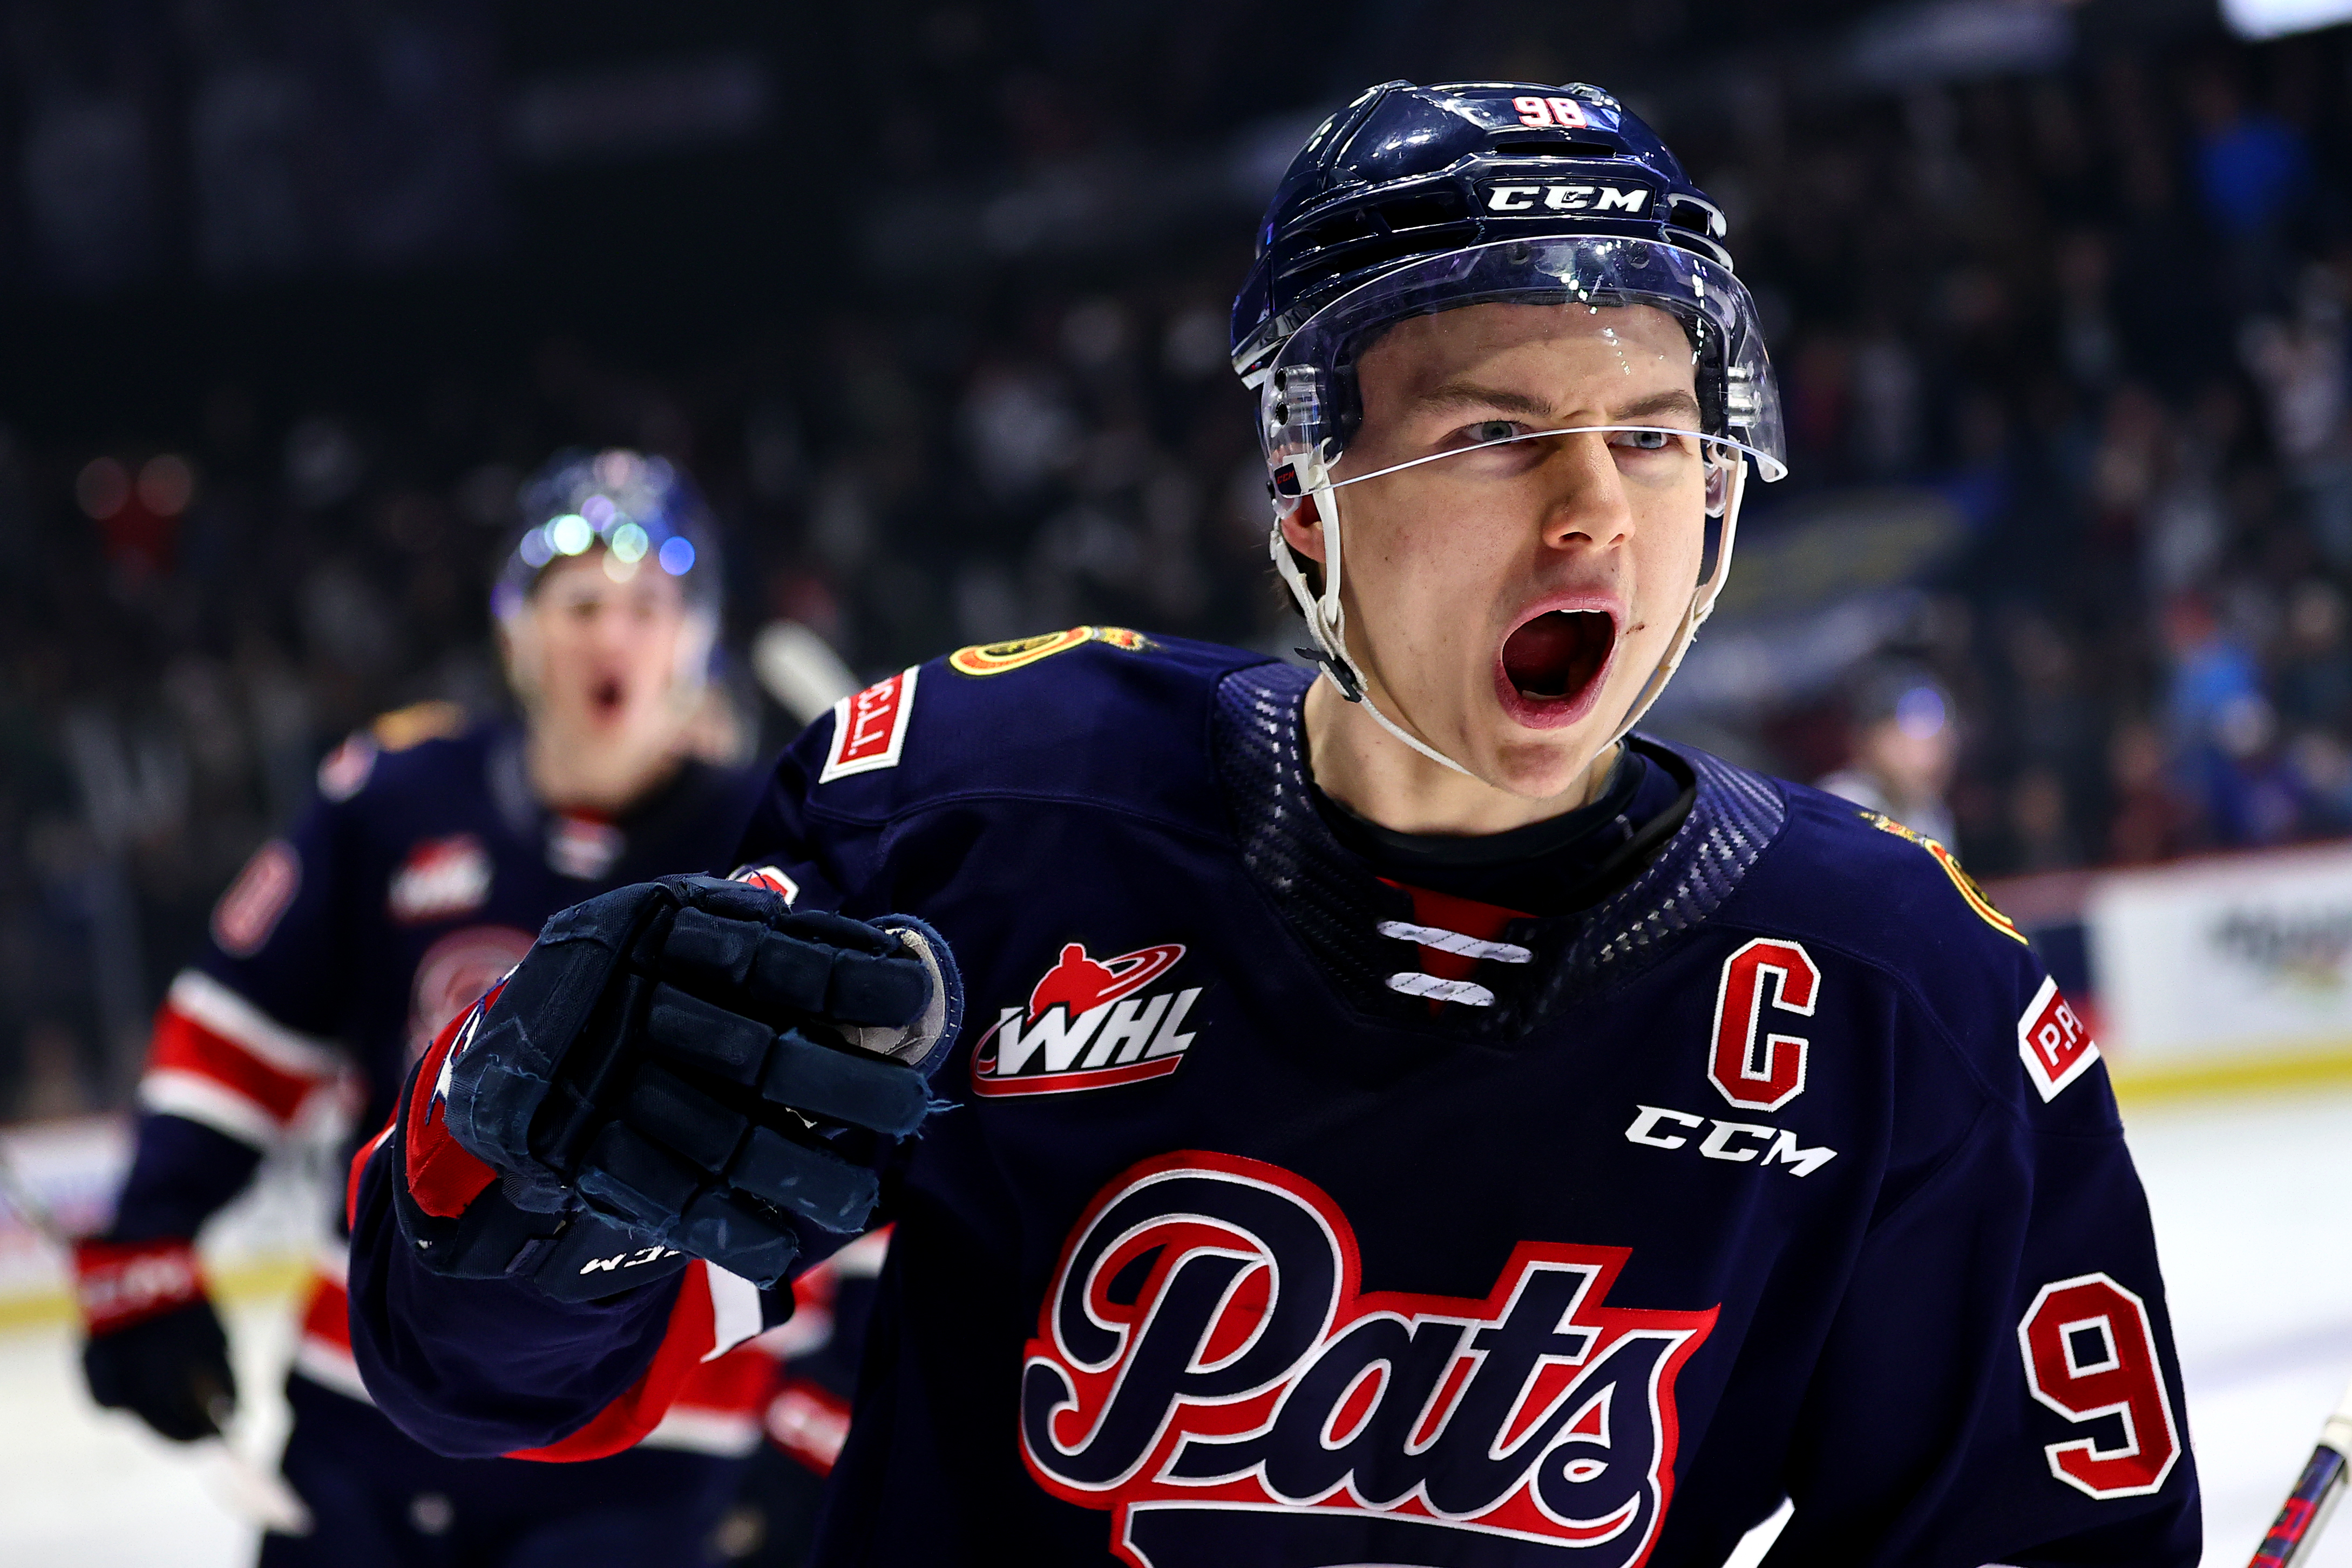 Berezowski Named U.S. Division Player of the Year - OurSports Central